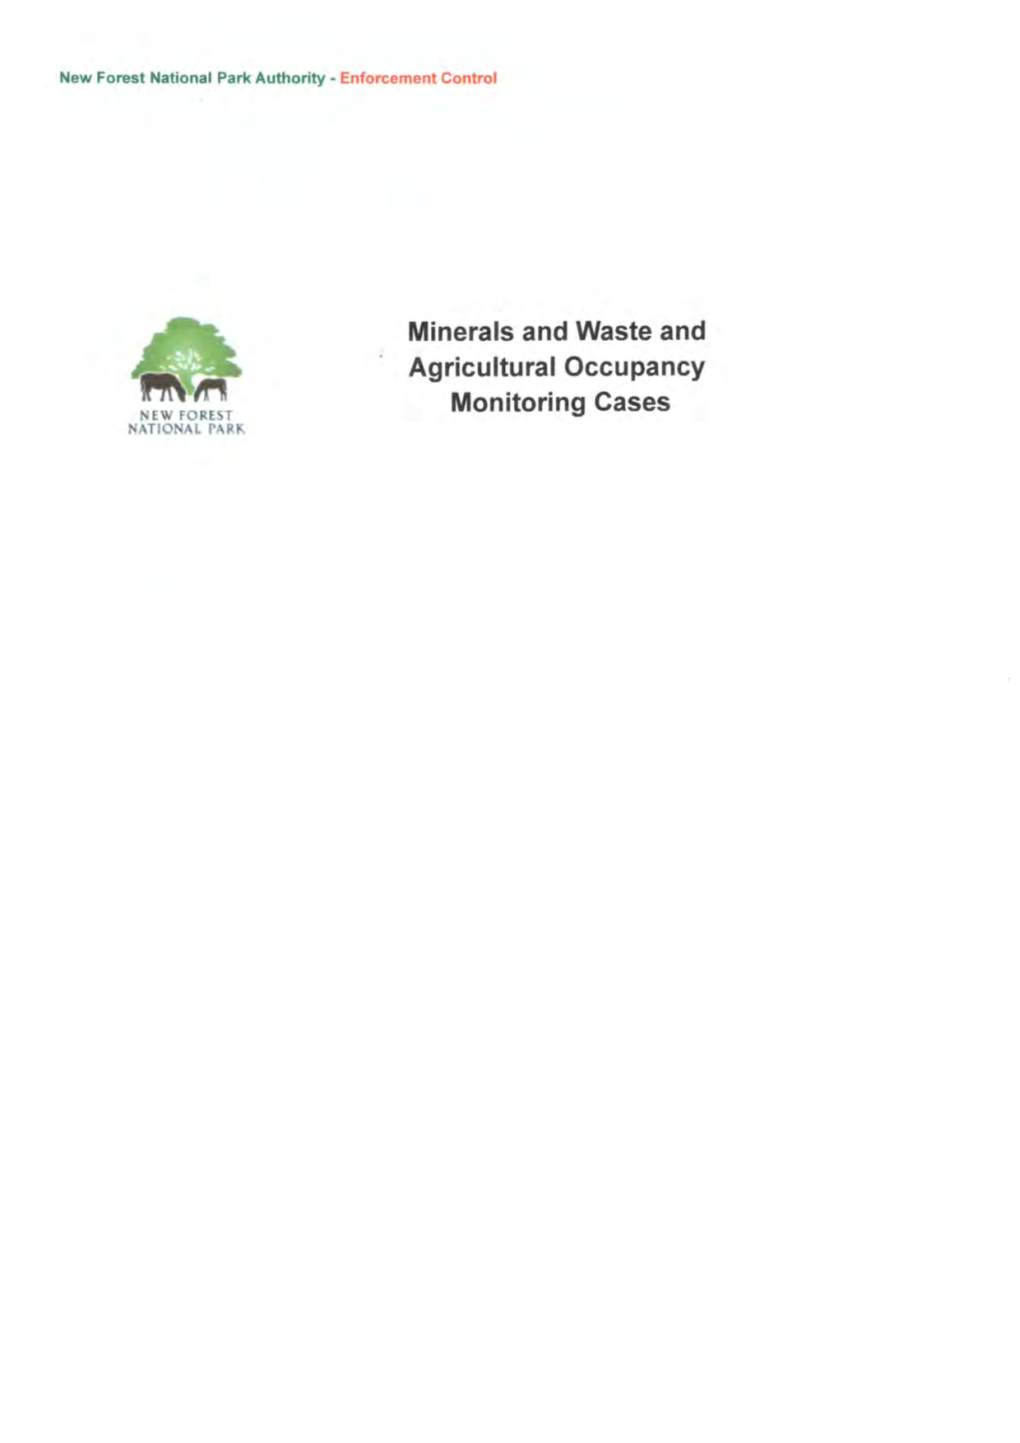 Minerals and Waste and Agricultural Occupancy Monitoring Cases